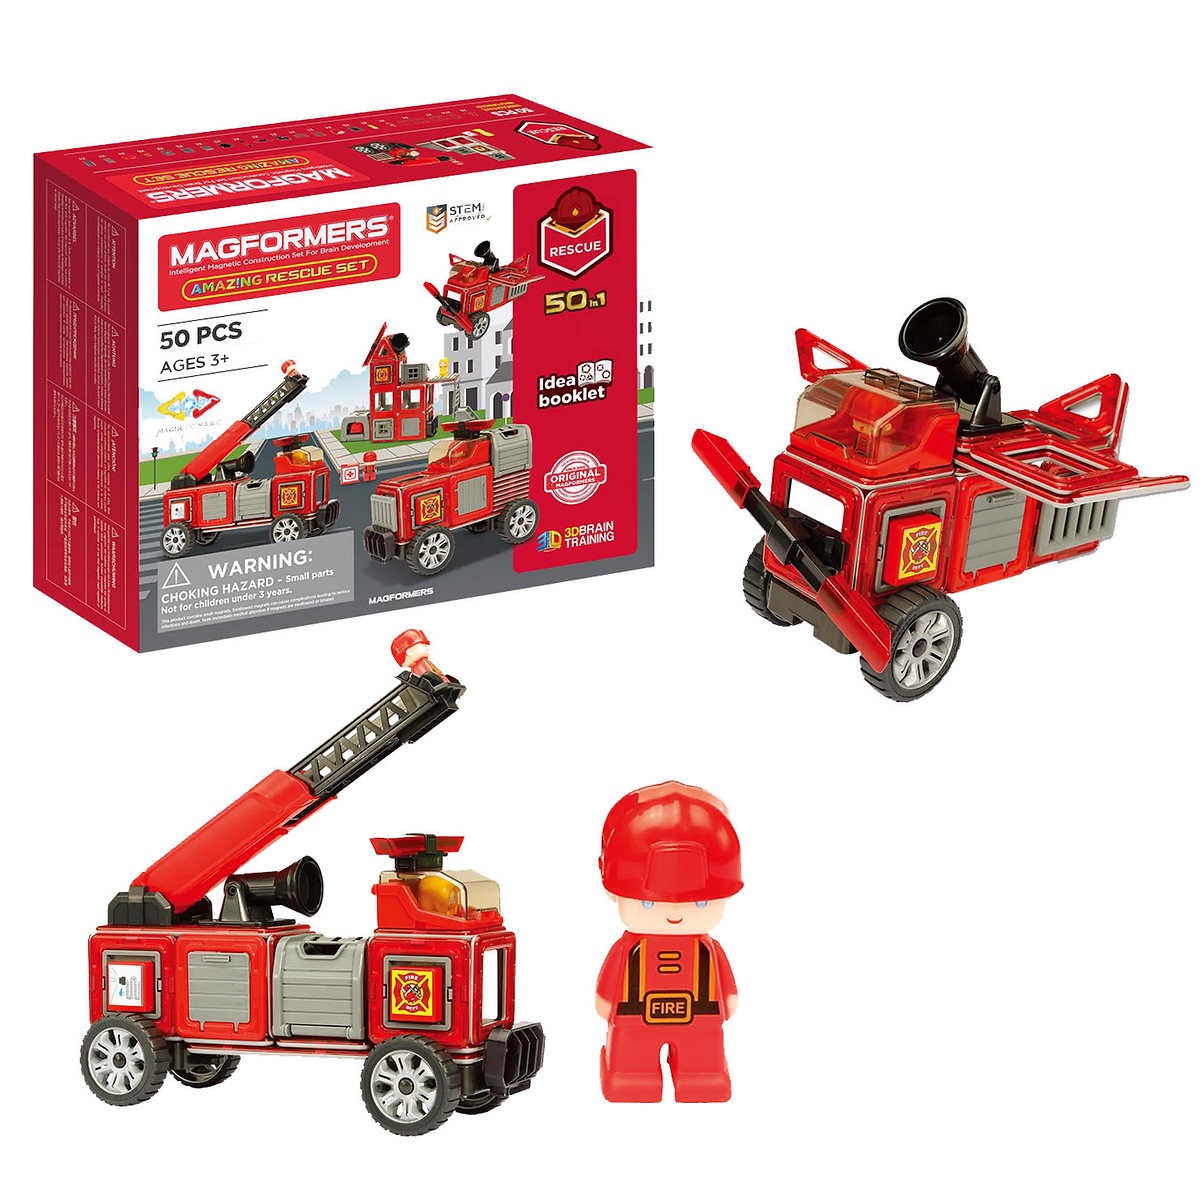 Magformers Rescue Set, 50-piece磁力片